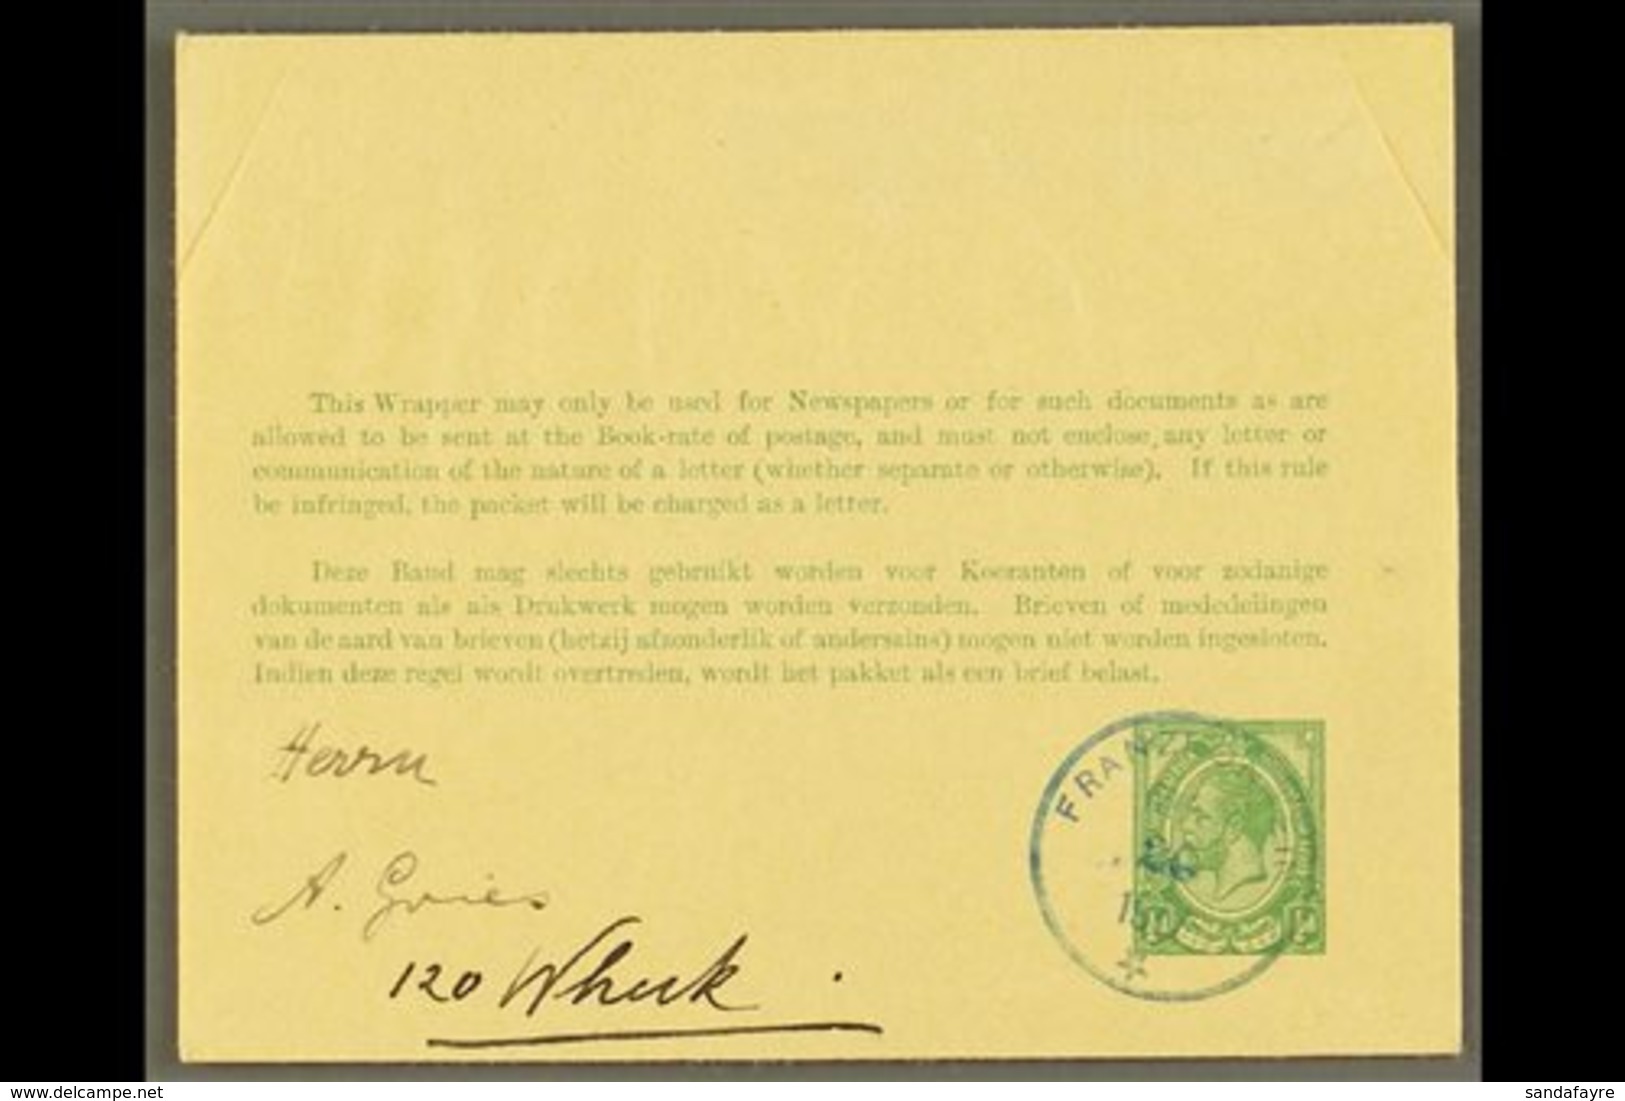 1917 (June) ½d Green On Buff Postal Wrapper To Windhuk Showing A Very Fine "FRANZFONTEIN" Cds Postmark In Blue, Putzel T - South West Africa (1923-1990)